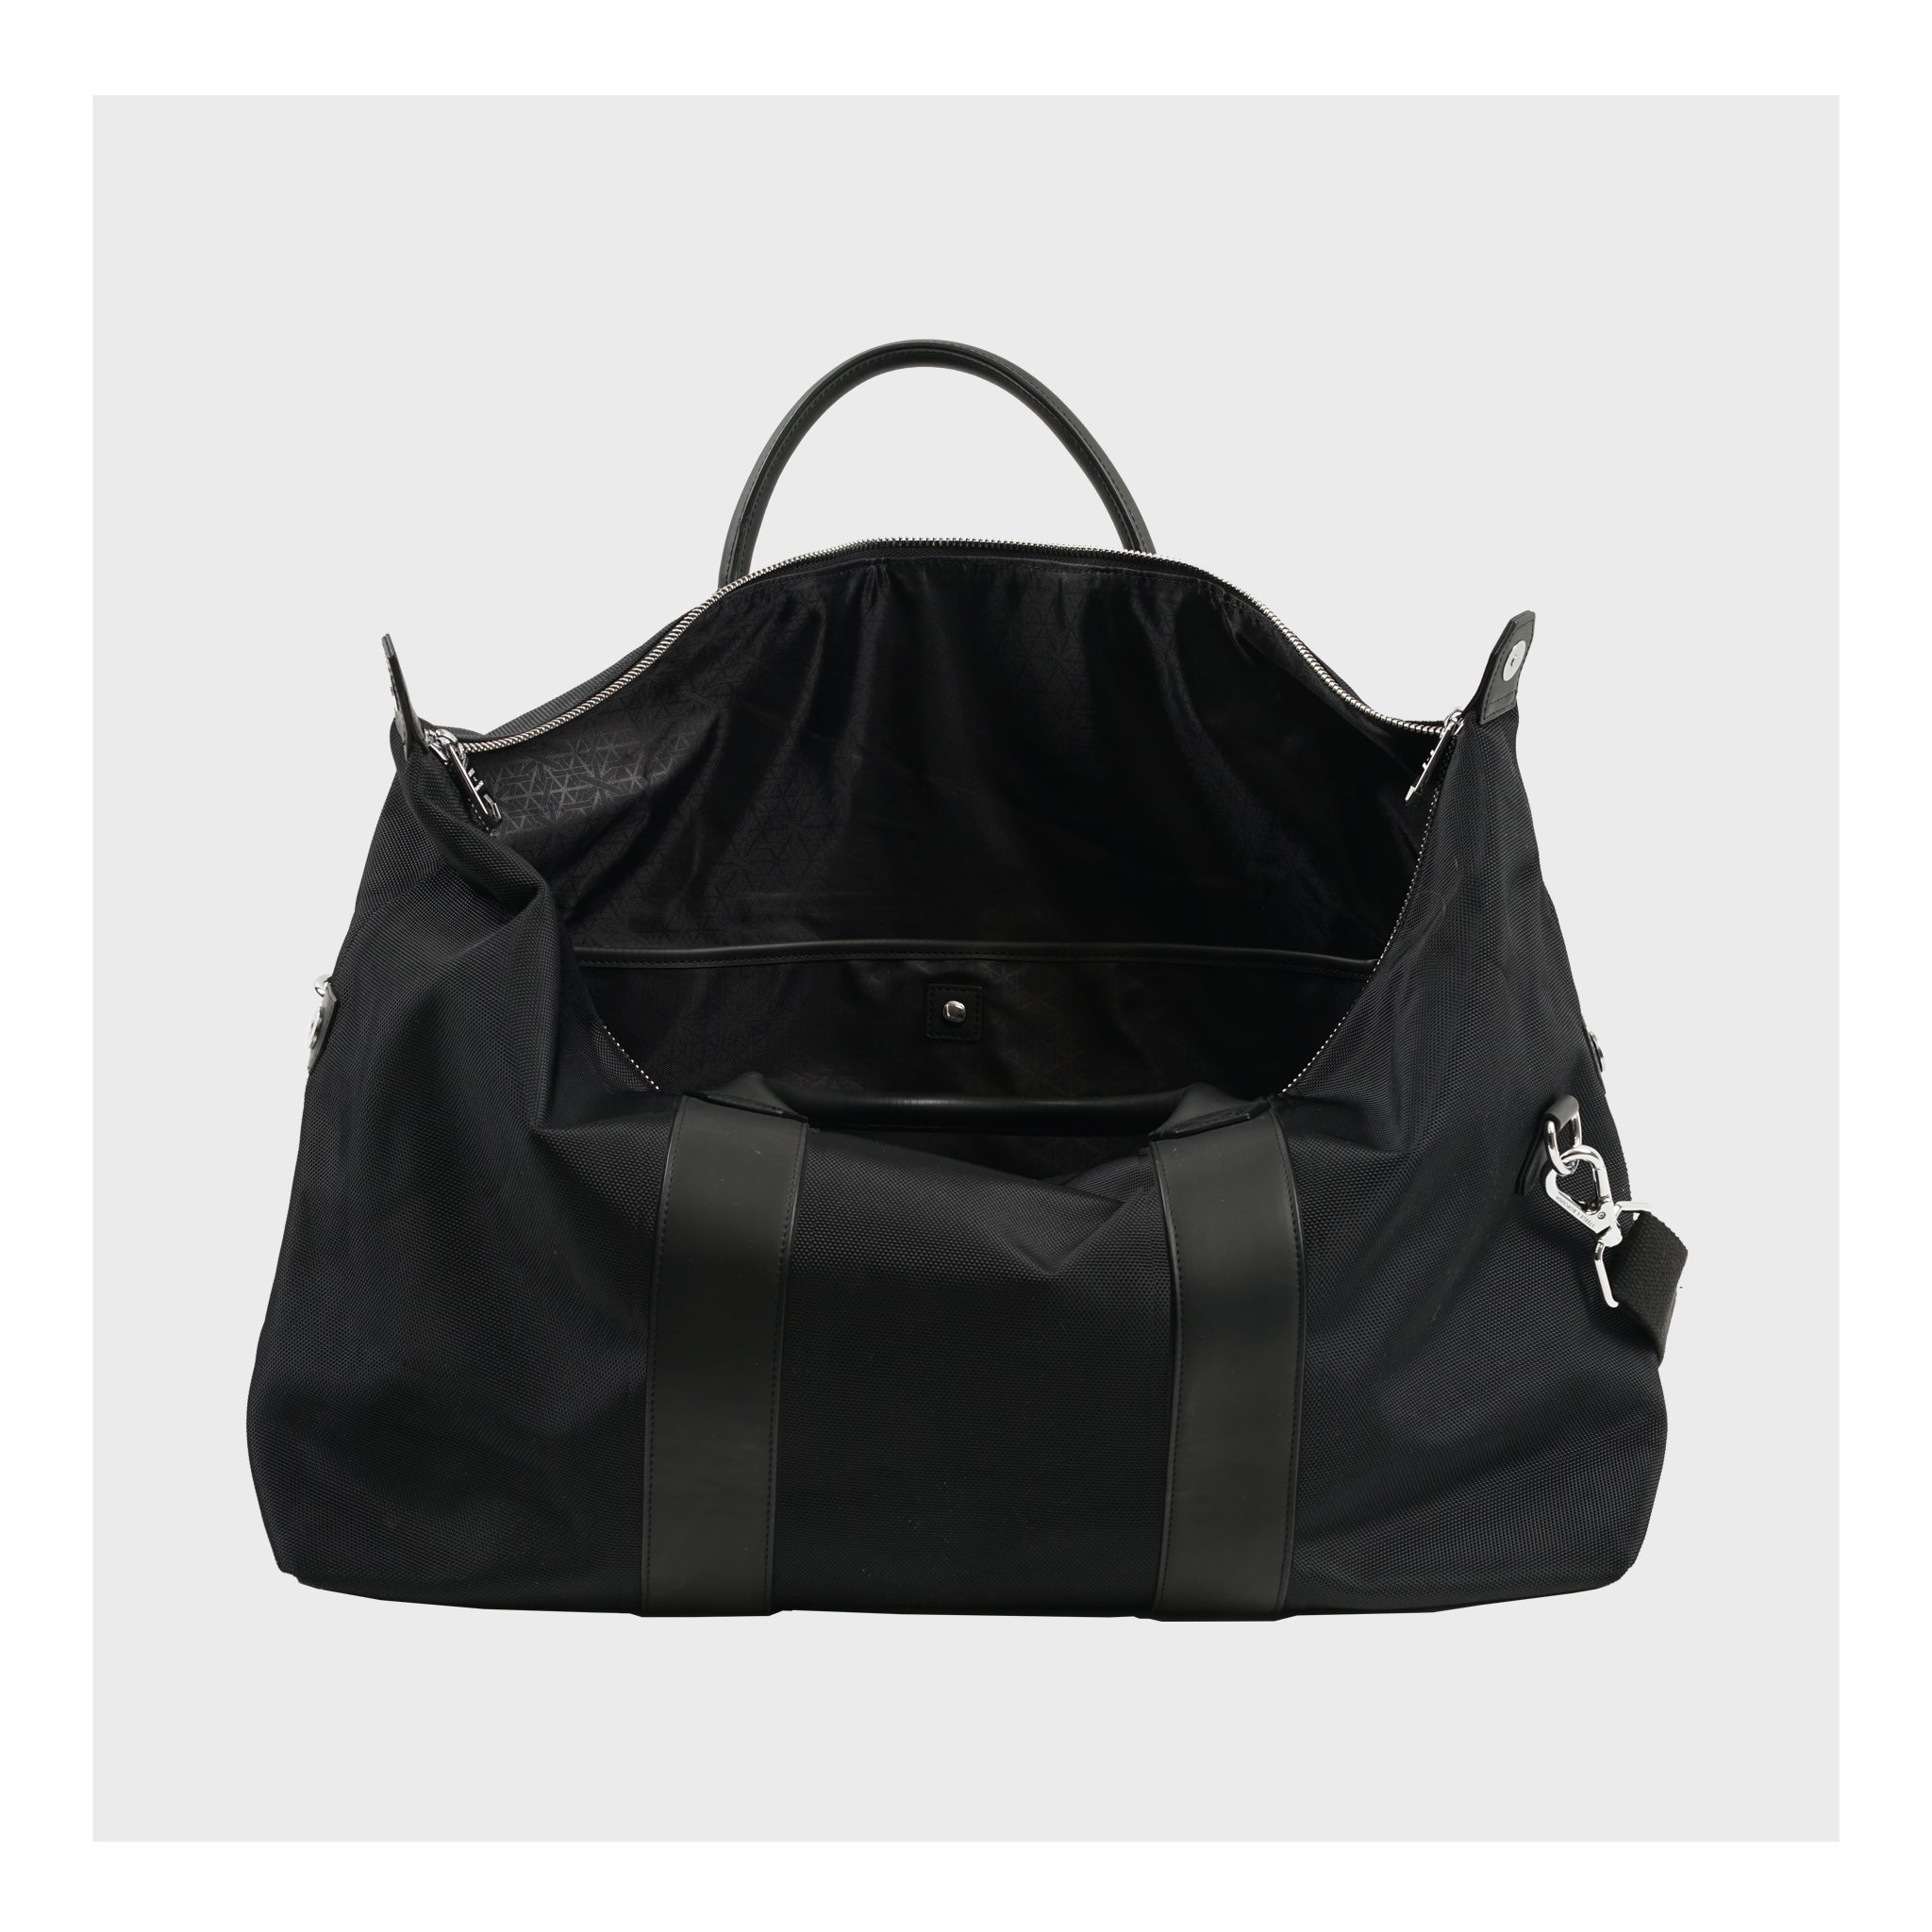 Top open view of the black Weekend Bag, highlighting the ample storage and quality lining